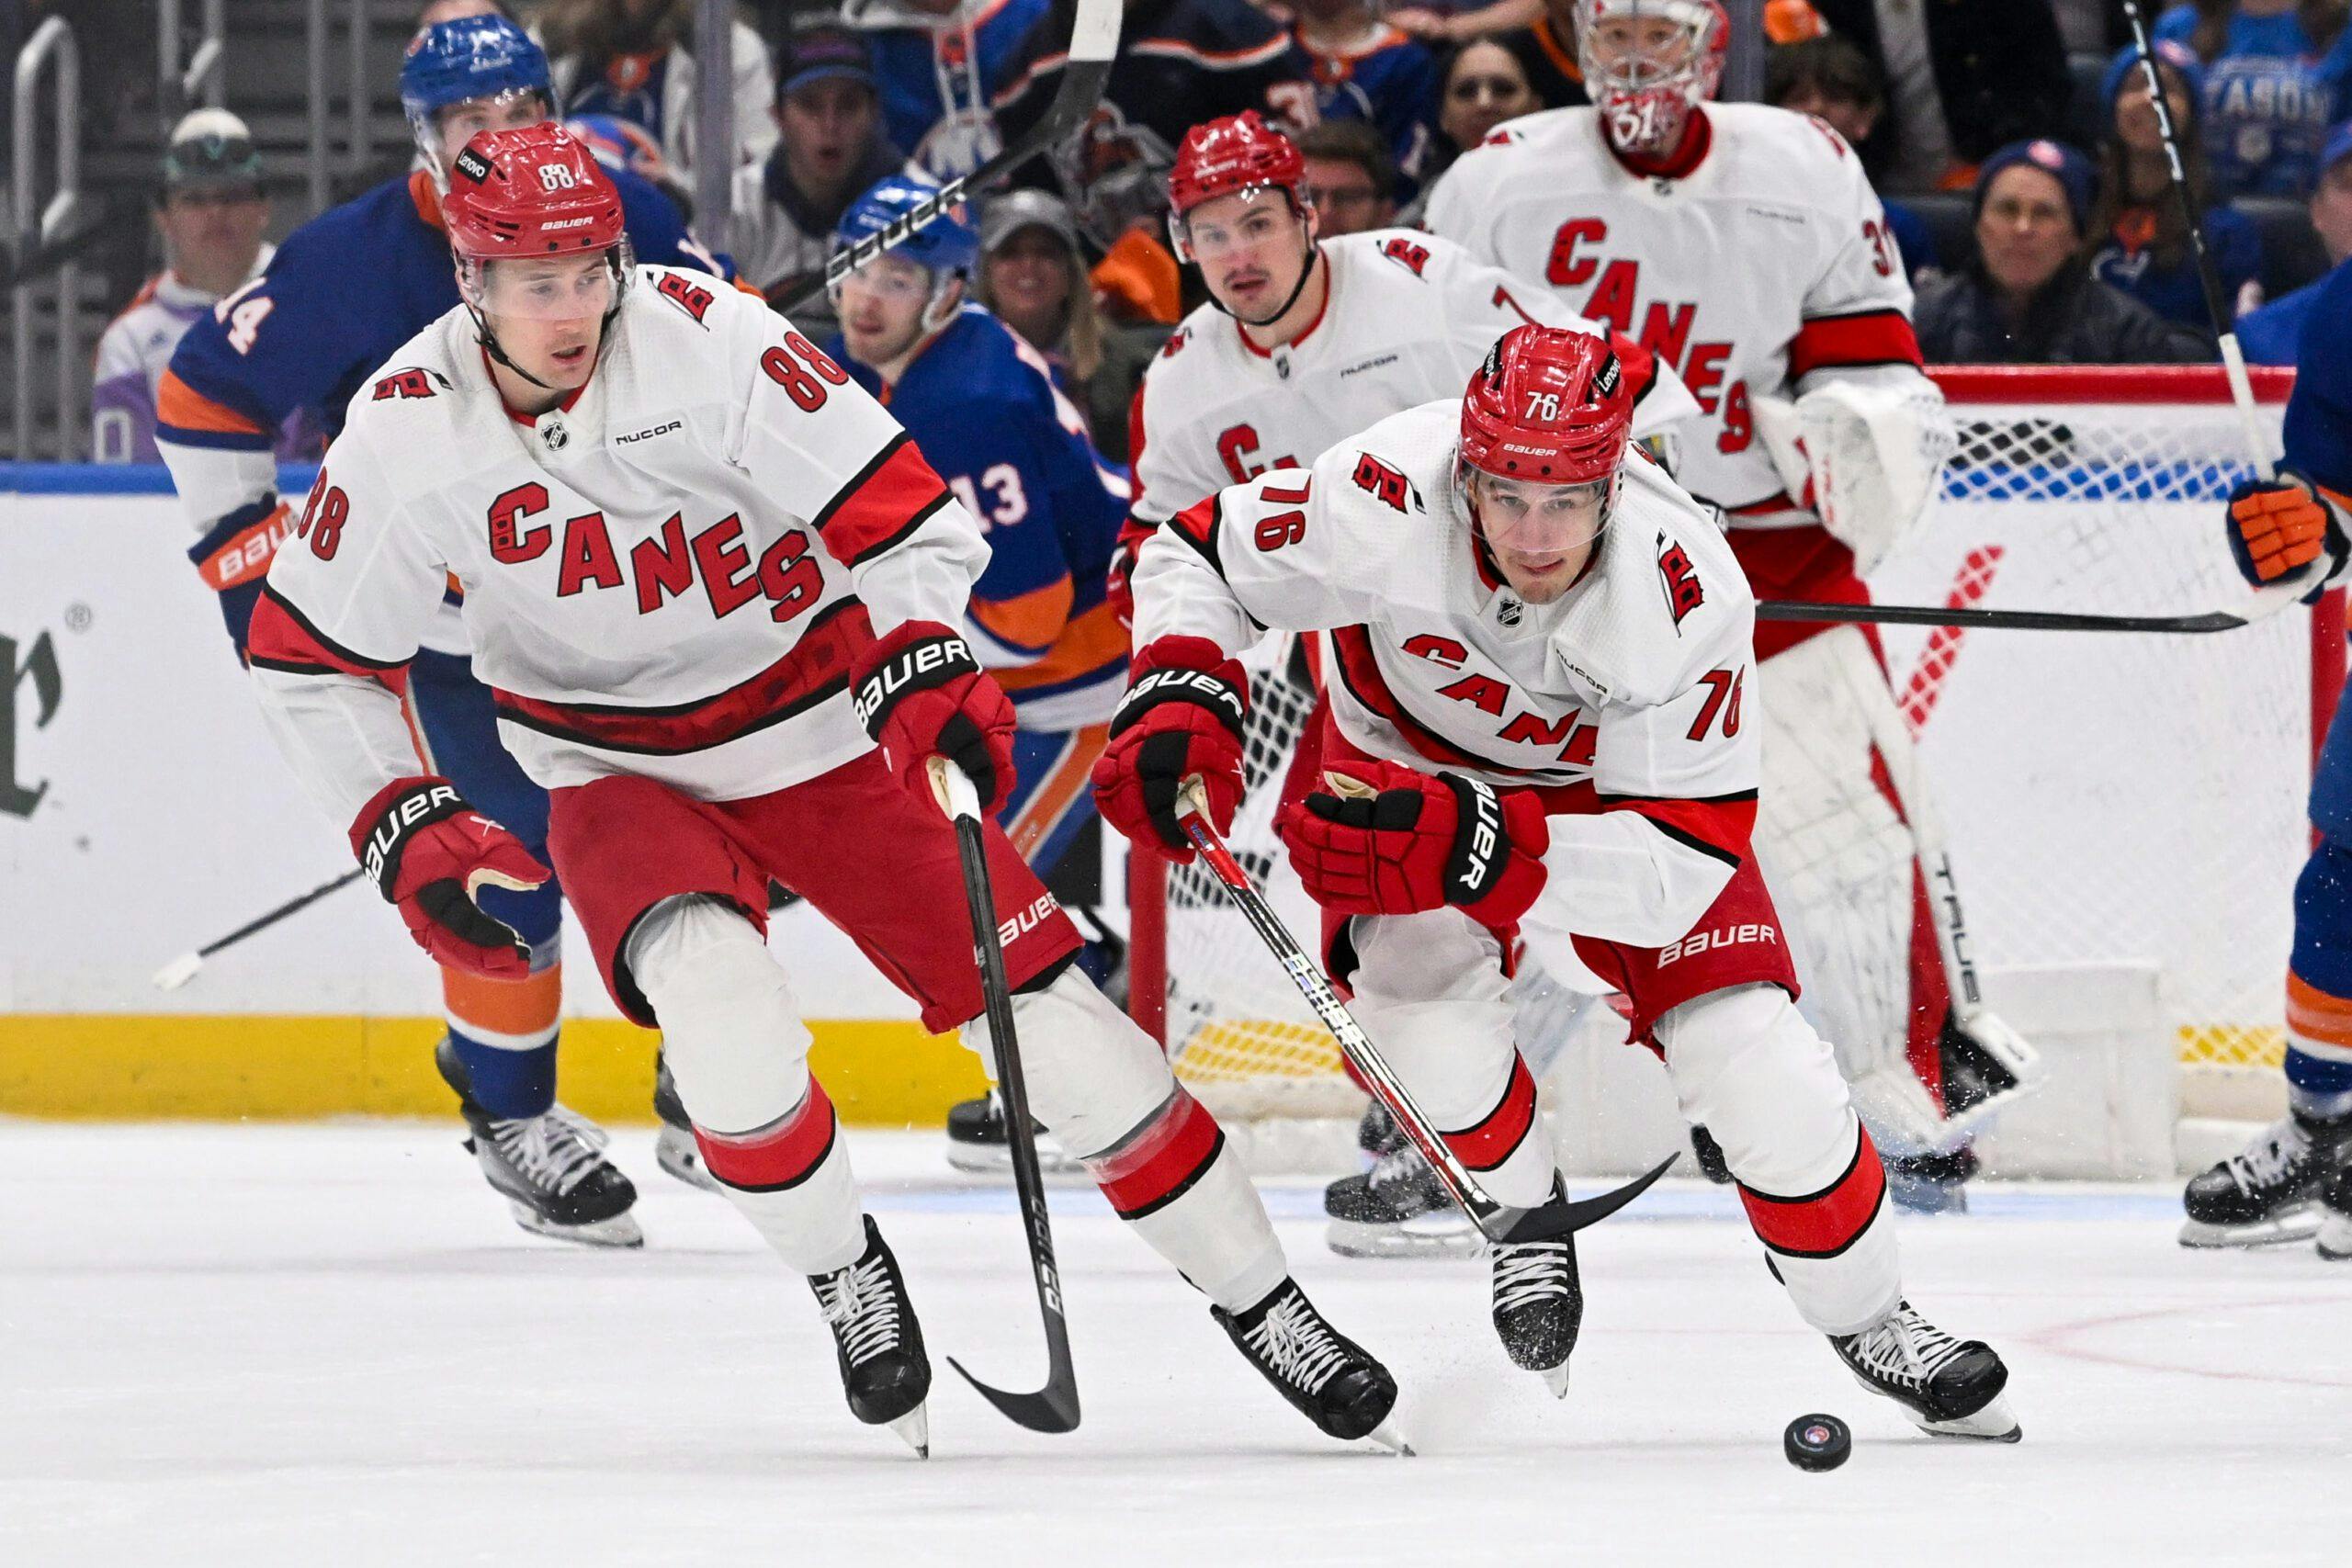 The Carolina Hurricanes have shown imperfections, but they’re making magic